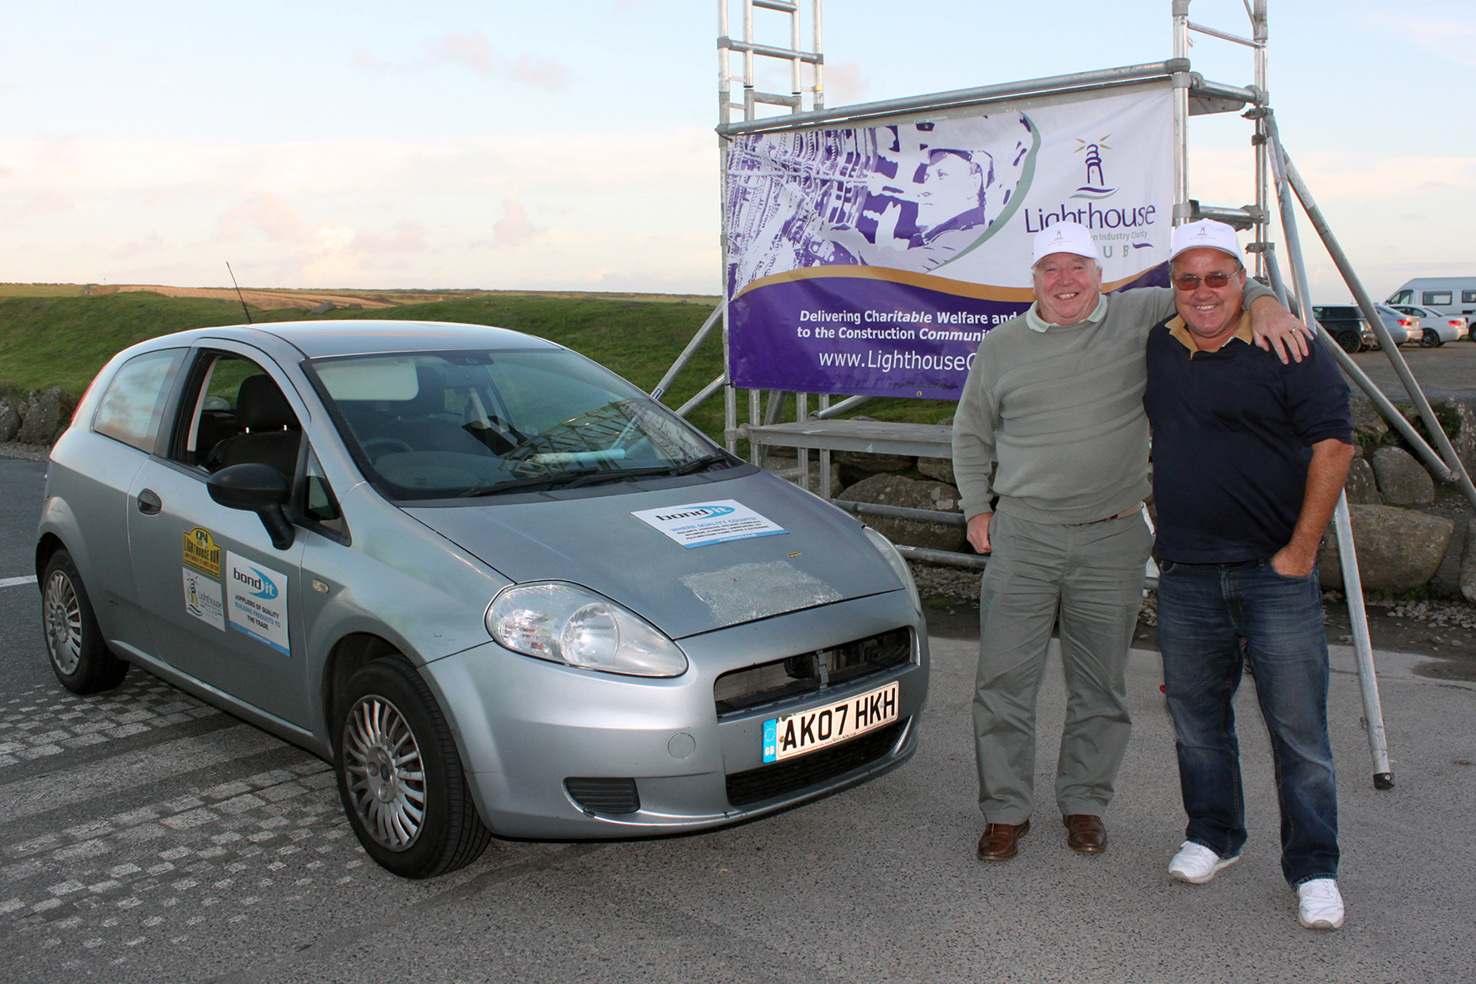 Charity fundraisers. Bond It sponsored Steve Bulless (left) and Will Linday (right) for The Lighthouse Club John O’Groats to Land’s End Run 2016.